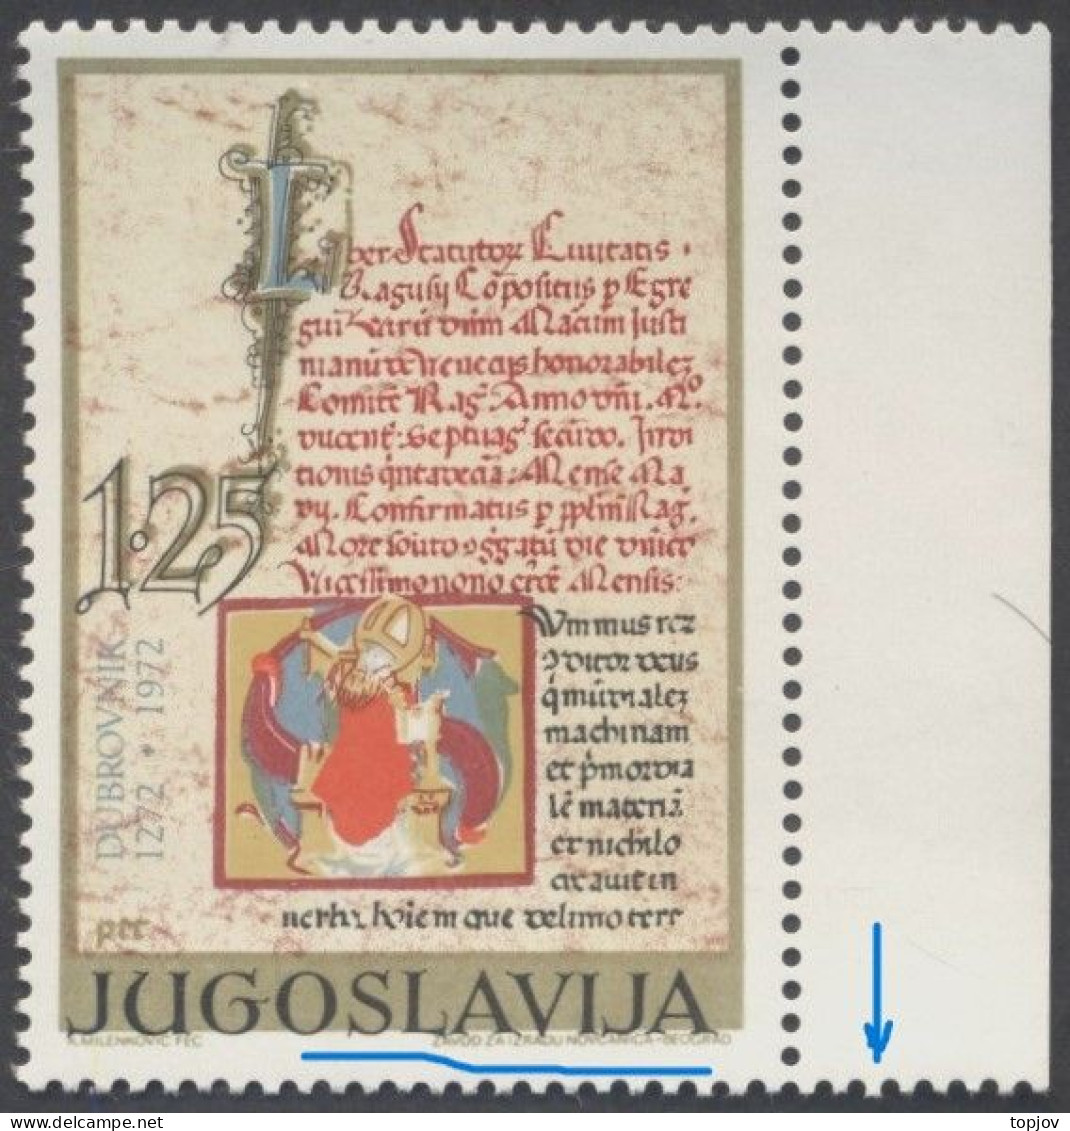 JUGOSLAVIA  - YUGOSLAVIA - ERROR  DUBROVNIK INCLINED INSCRIPTION OF THE COUNTRY  -  **MNH - 1972 - Imperforates, Proofs & Errors